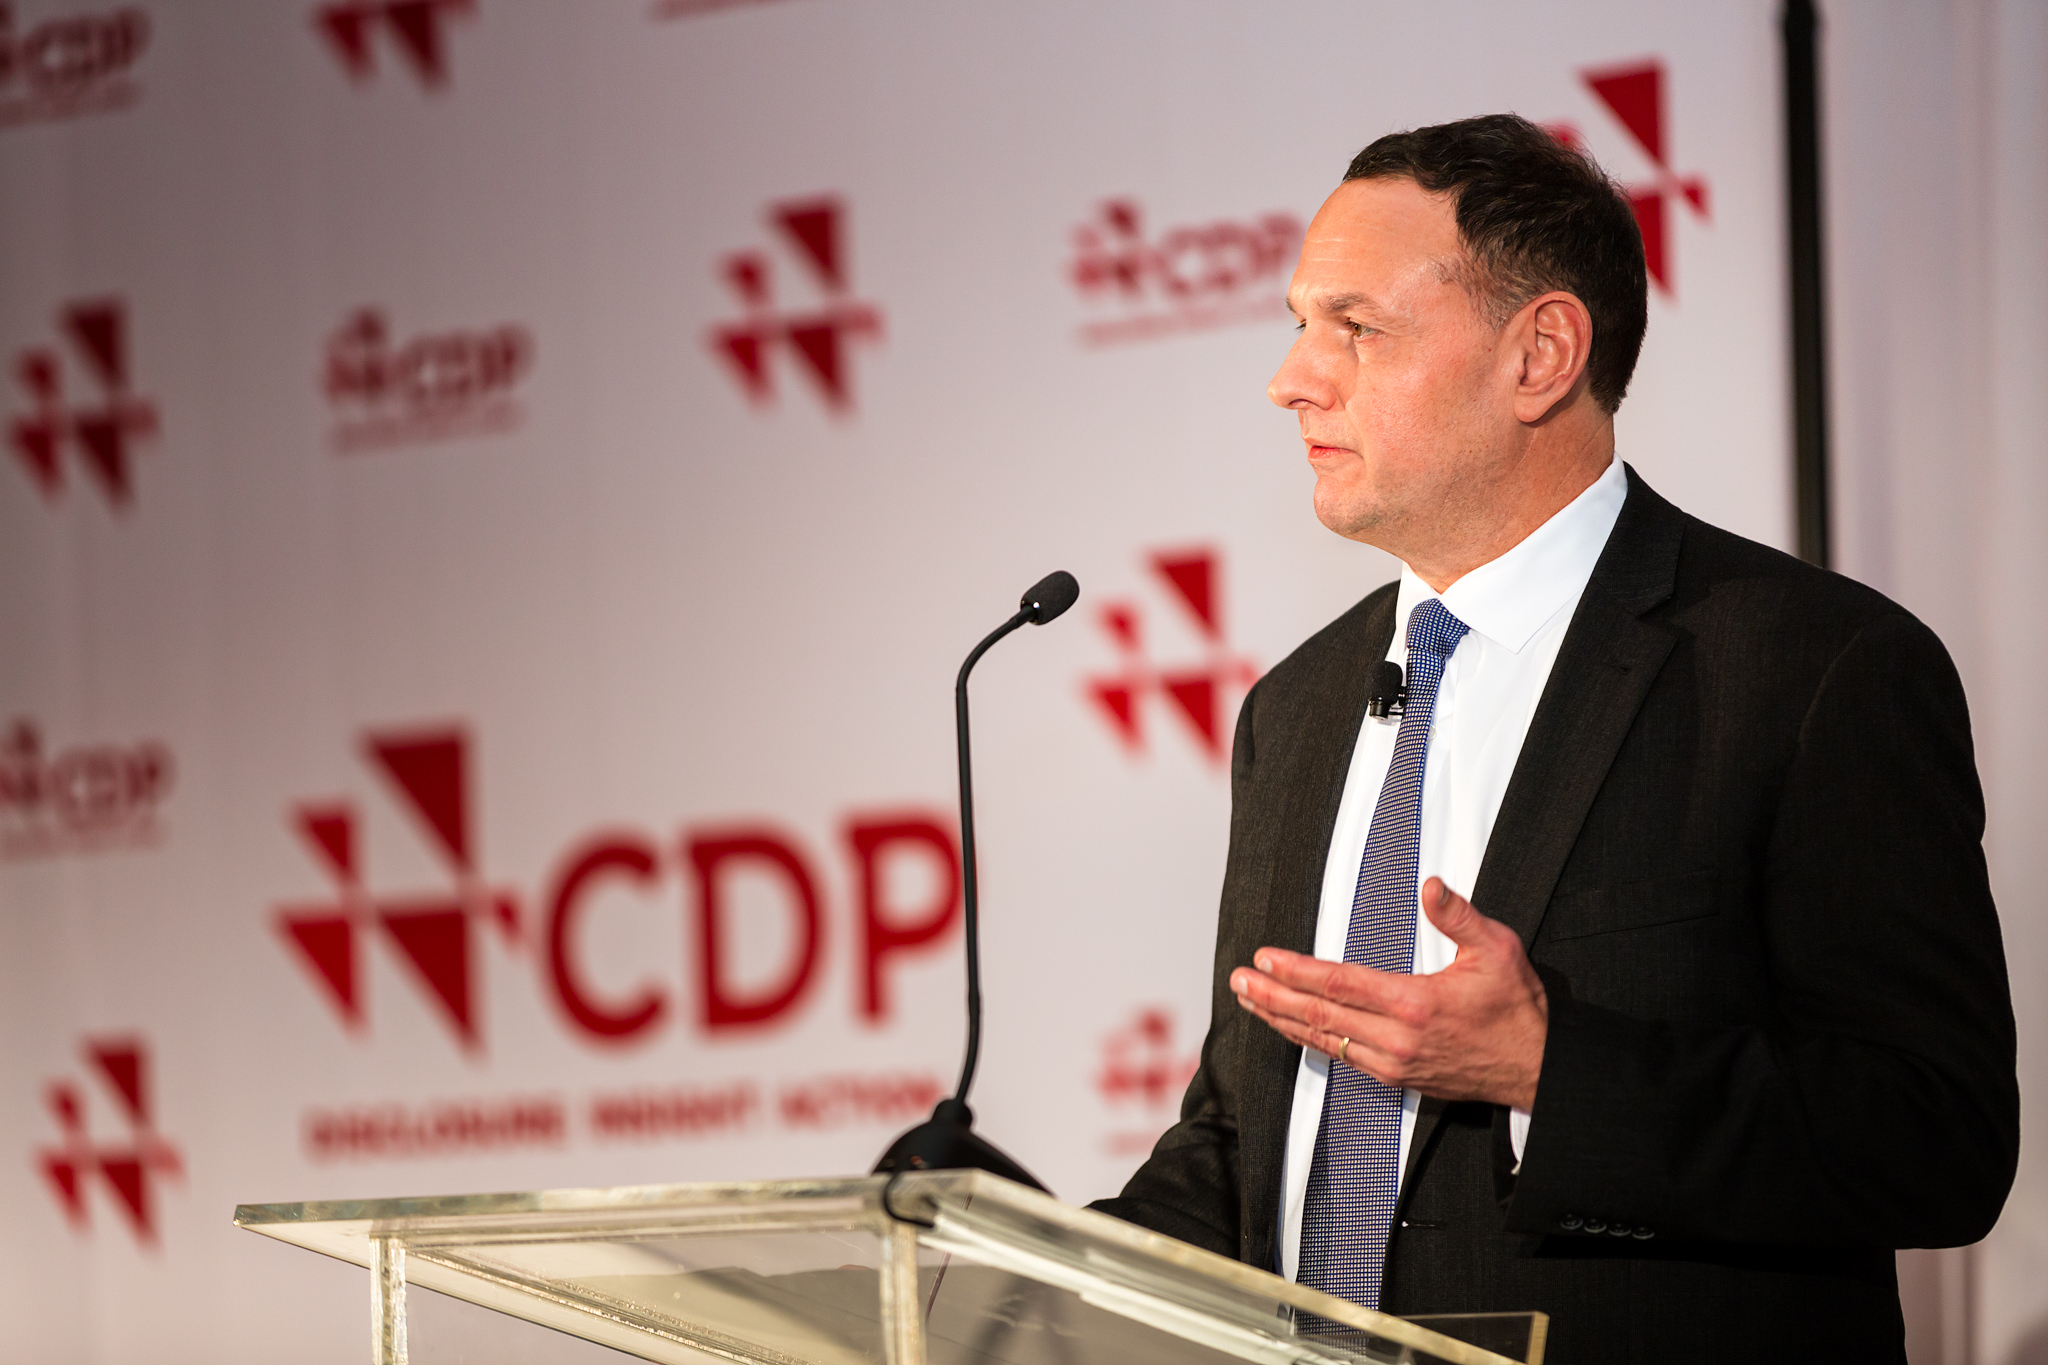 CDP's Lance Pierce addresses the audience at the US report launch, December 2017